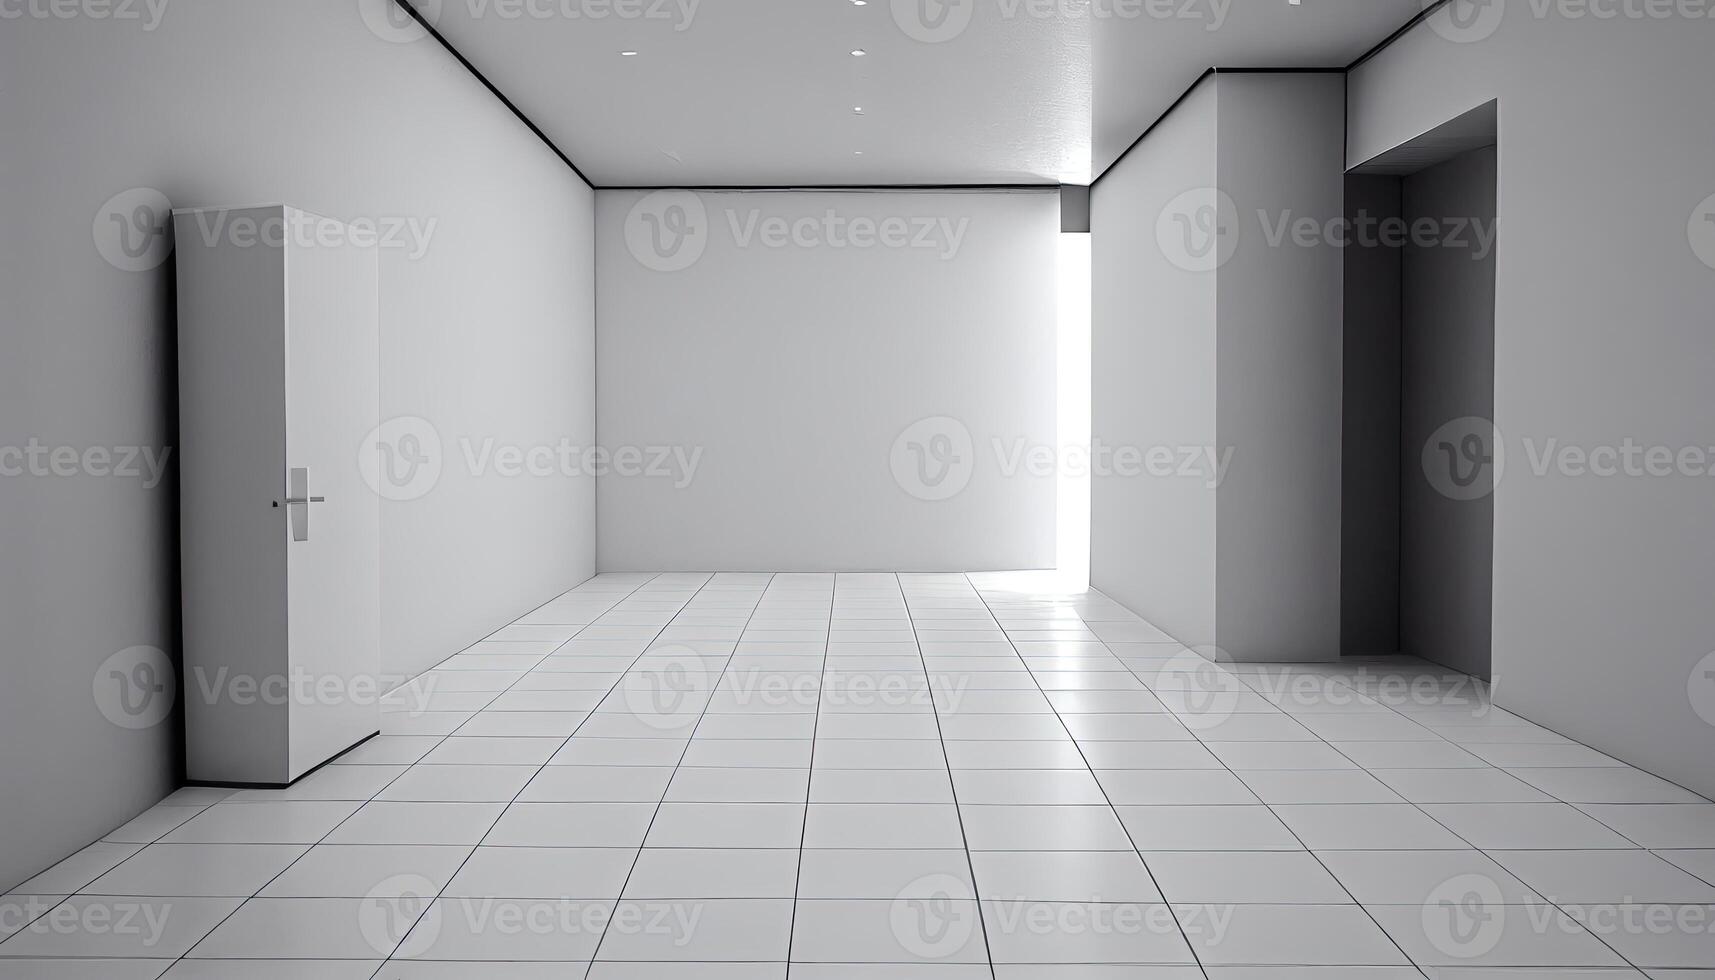 Empty room with window, walls, floor and ceiling. 3d blank interior of living room, office, gallery, studio or hallway, realistic illustration in perspective view. . photo